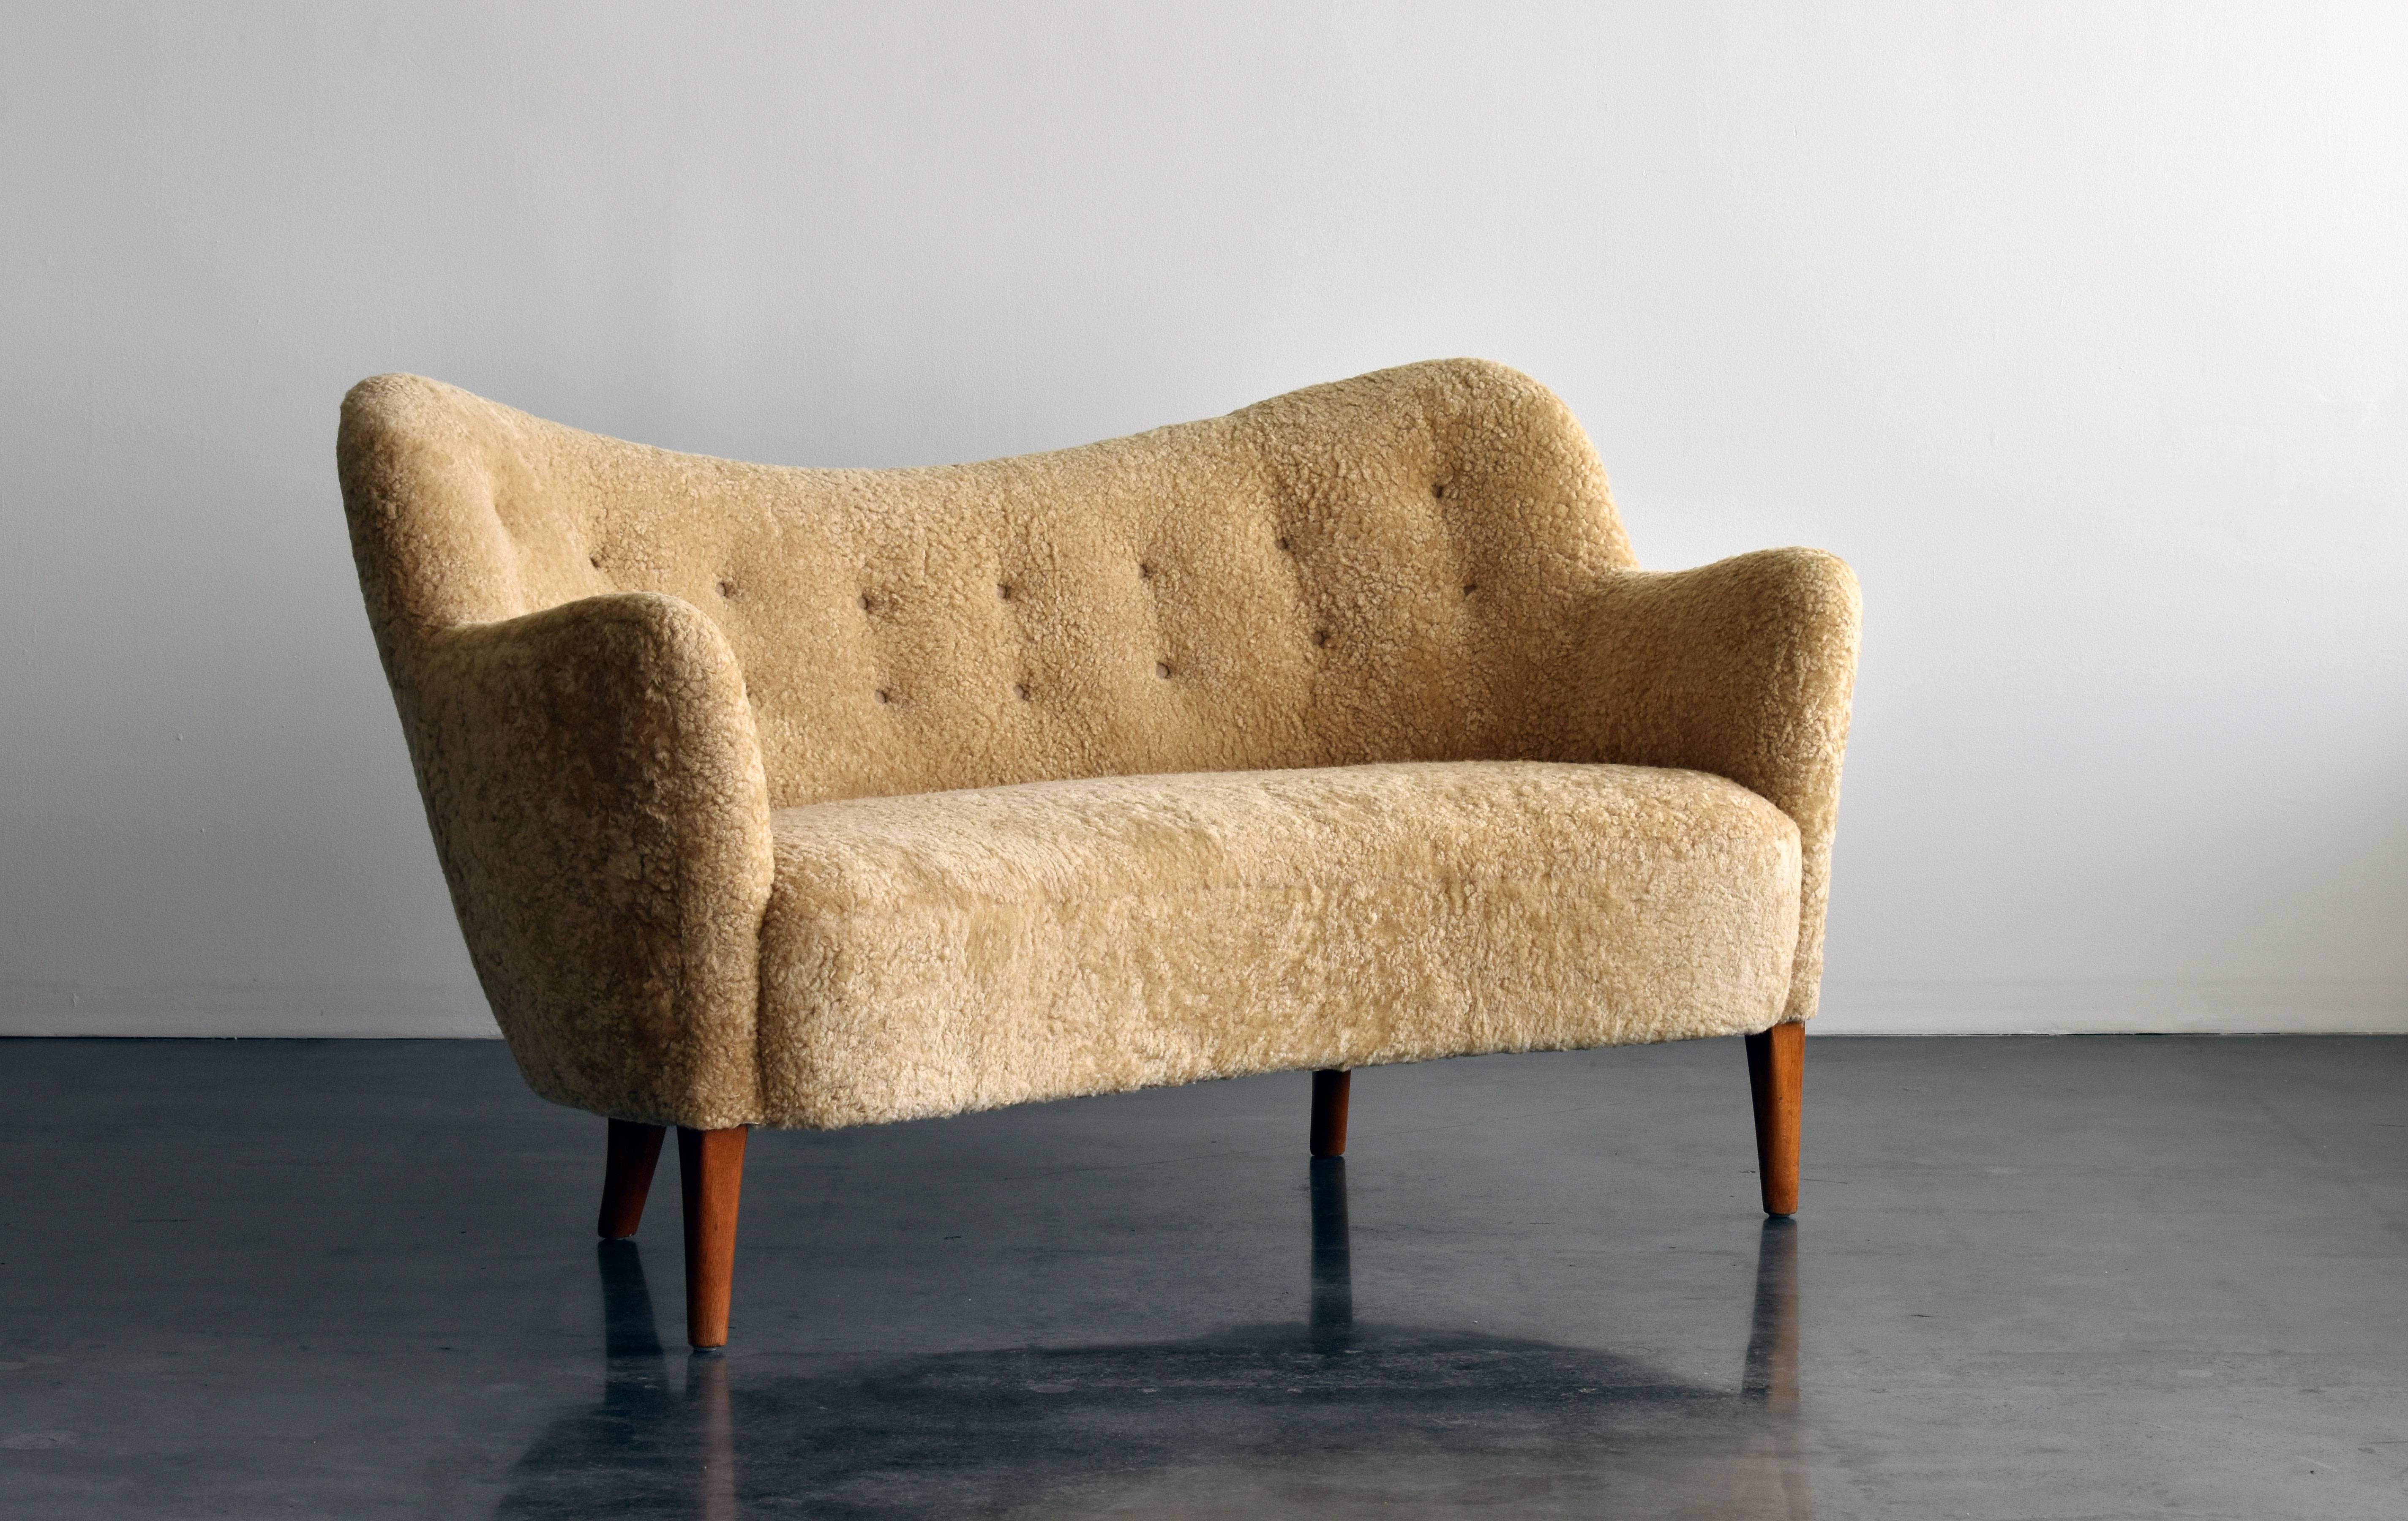 A sofa designed by Finn Juhl, executed by Carl Brorup in the late 1940s. Upholstered in beige sheepskin. 

The present model sofa is recorded in the digital furniture archives of the Danish Museum of Art & Design. Importantly note the tapered front